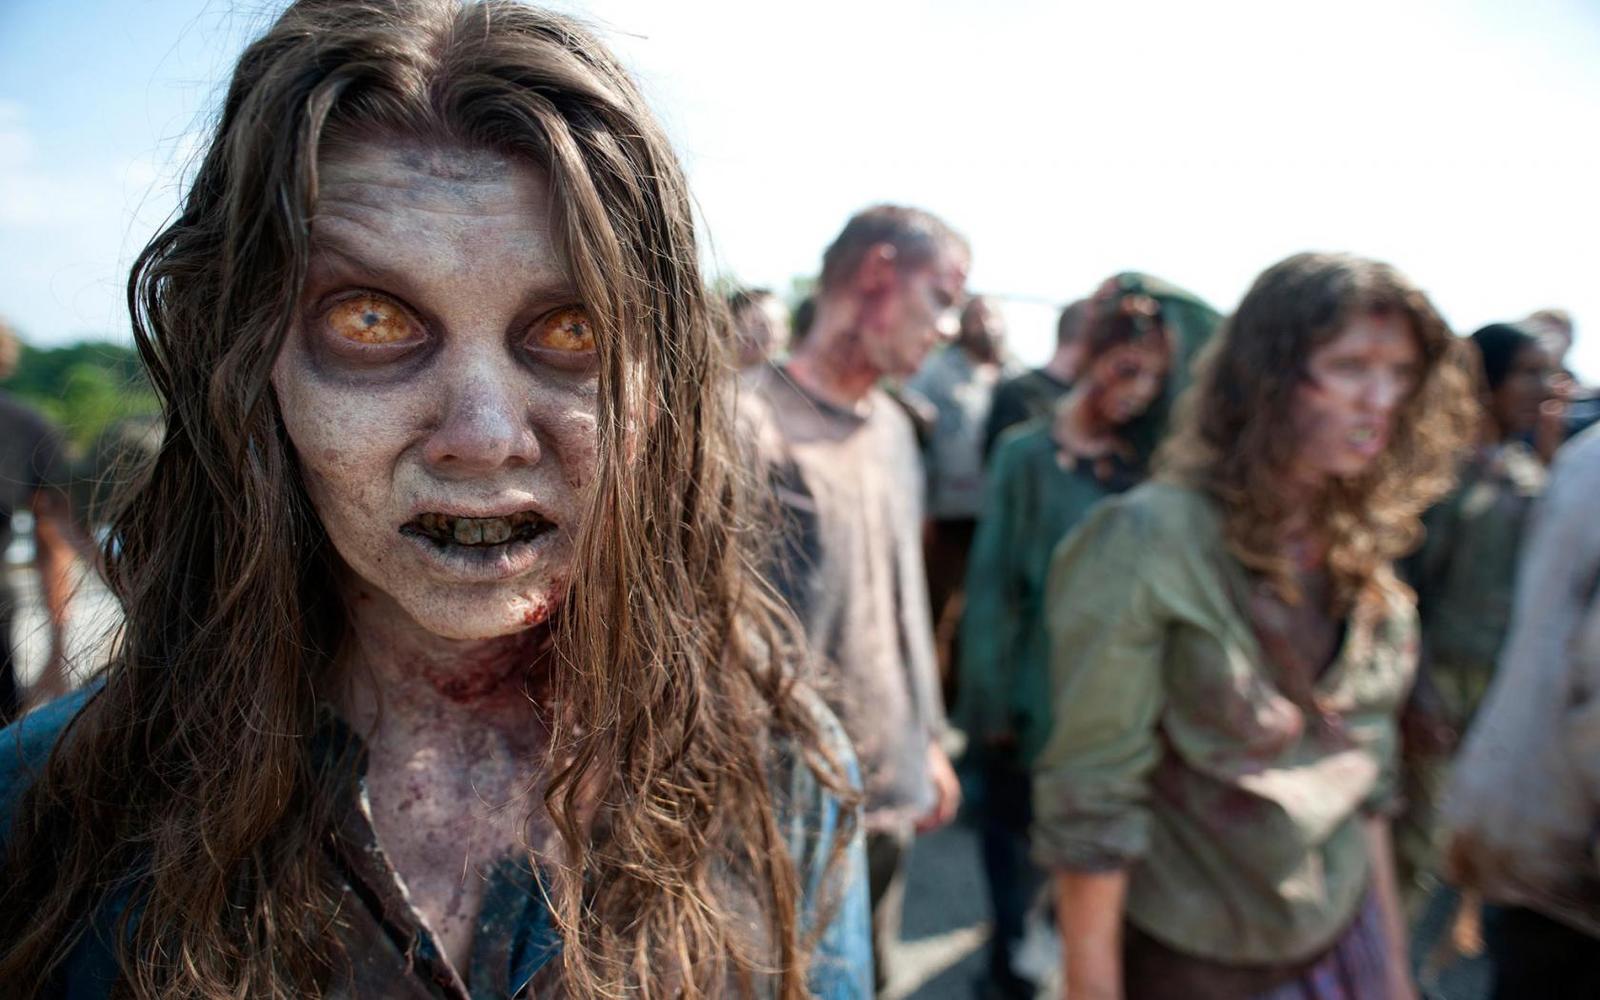 Interesting facts about zombies from the series The Walking Dead - Longpost, the walking Dead, Zombie